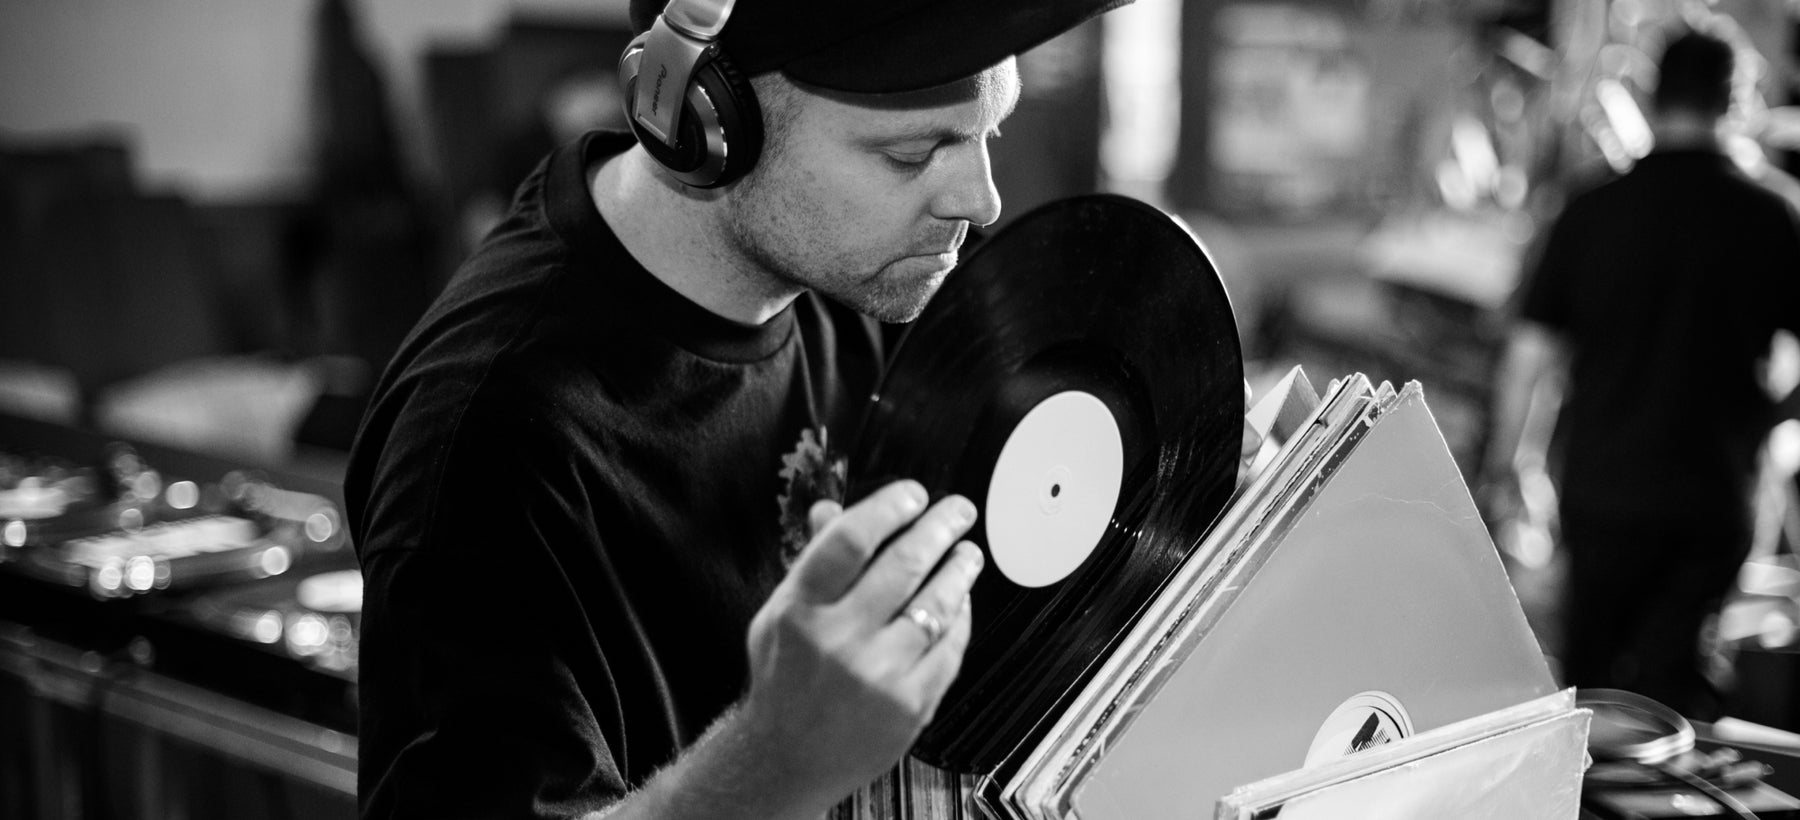 Dj Shadow Official Site And Merchandise